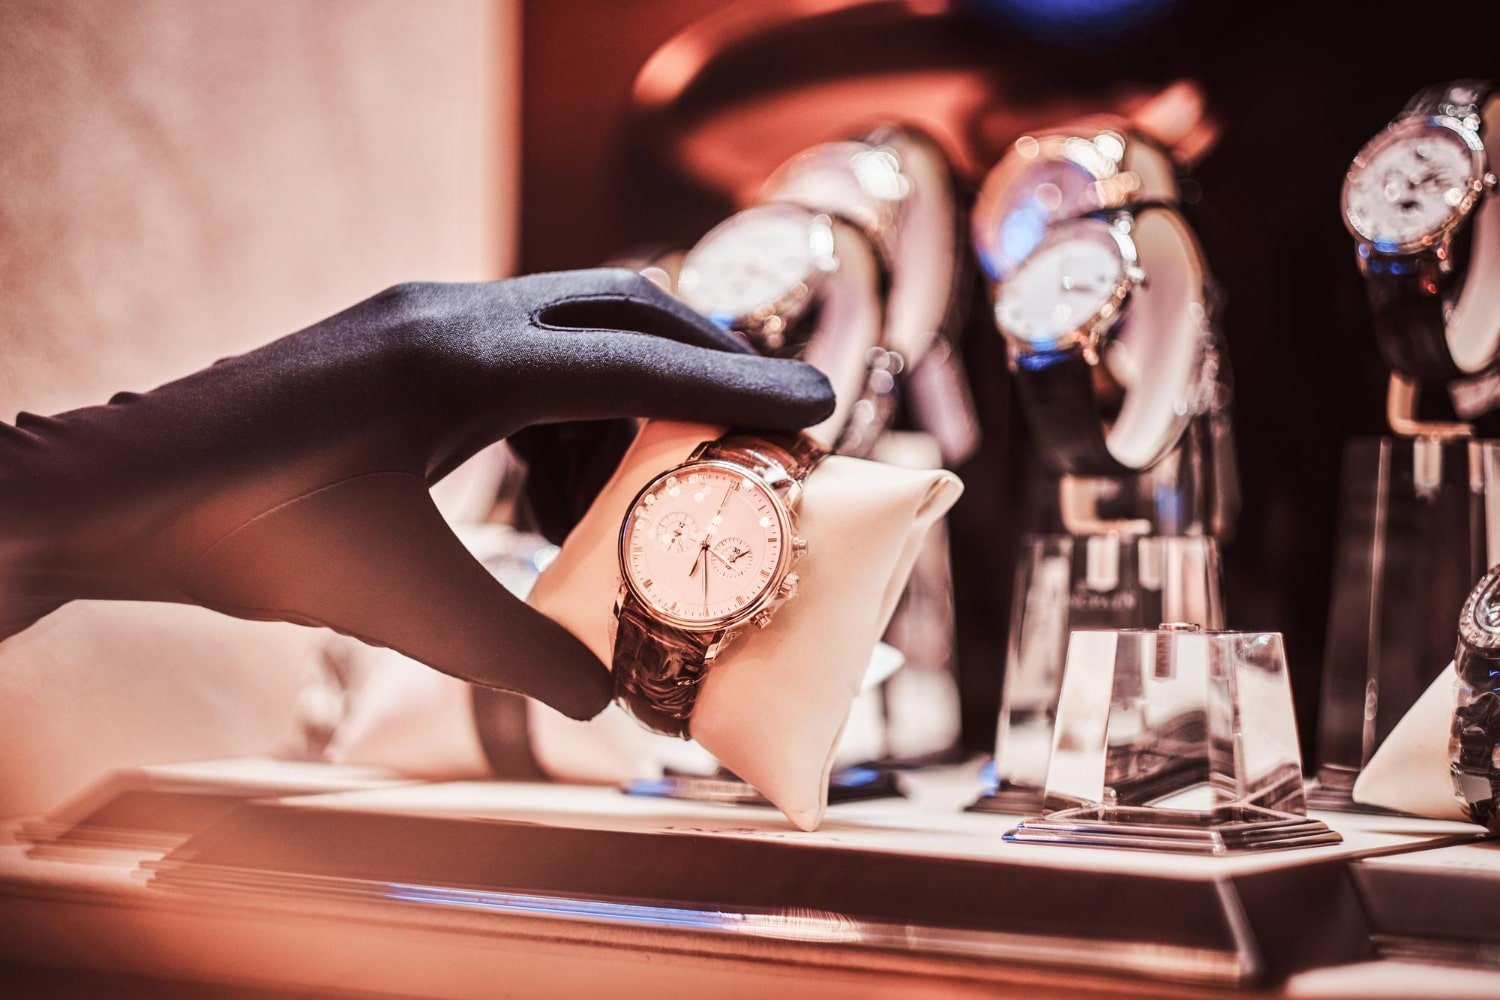 Find The Perfect Watch At First Class Watches’s Online Store